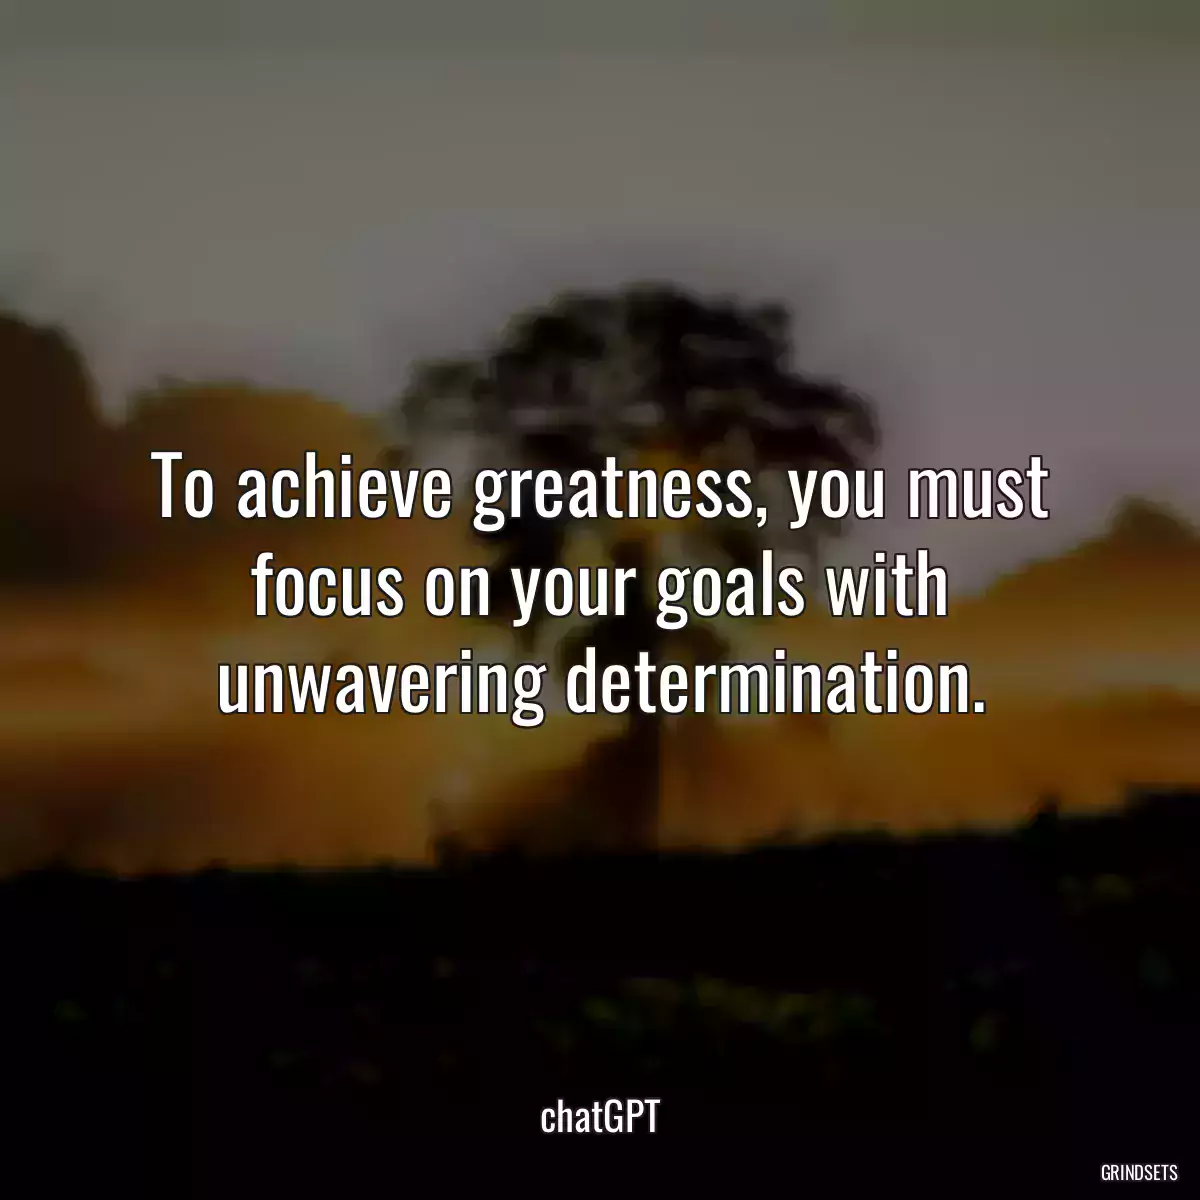 To achieve greatness, you must focus on your goals with unwavering determination.